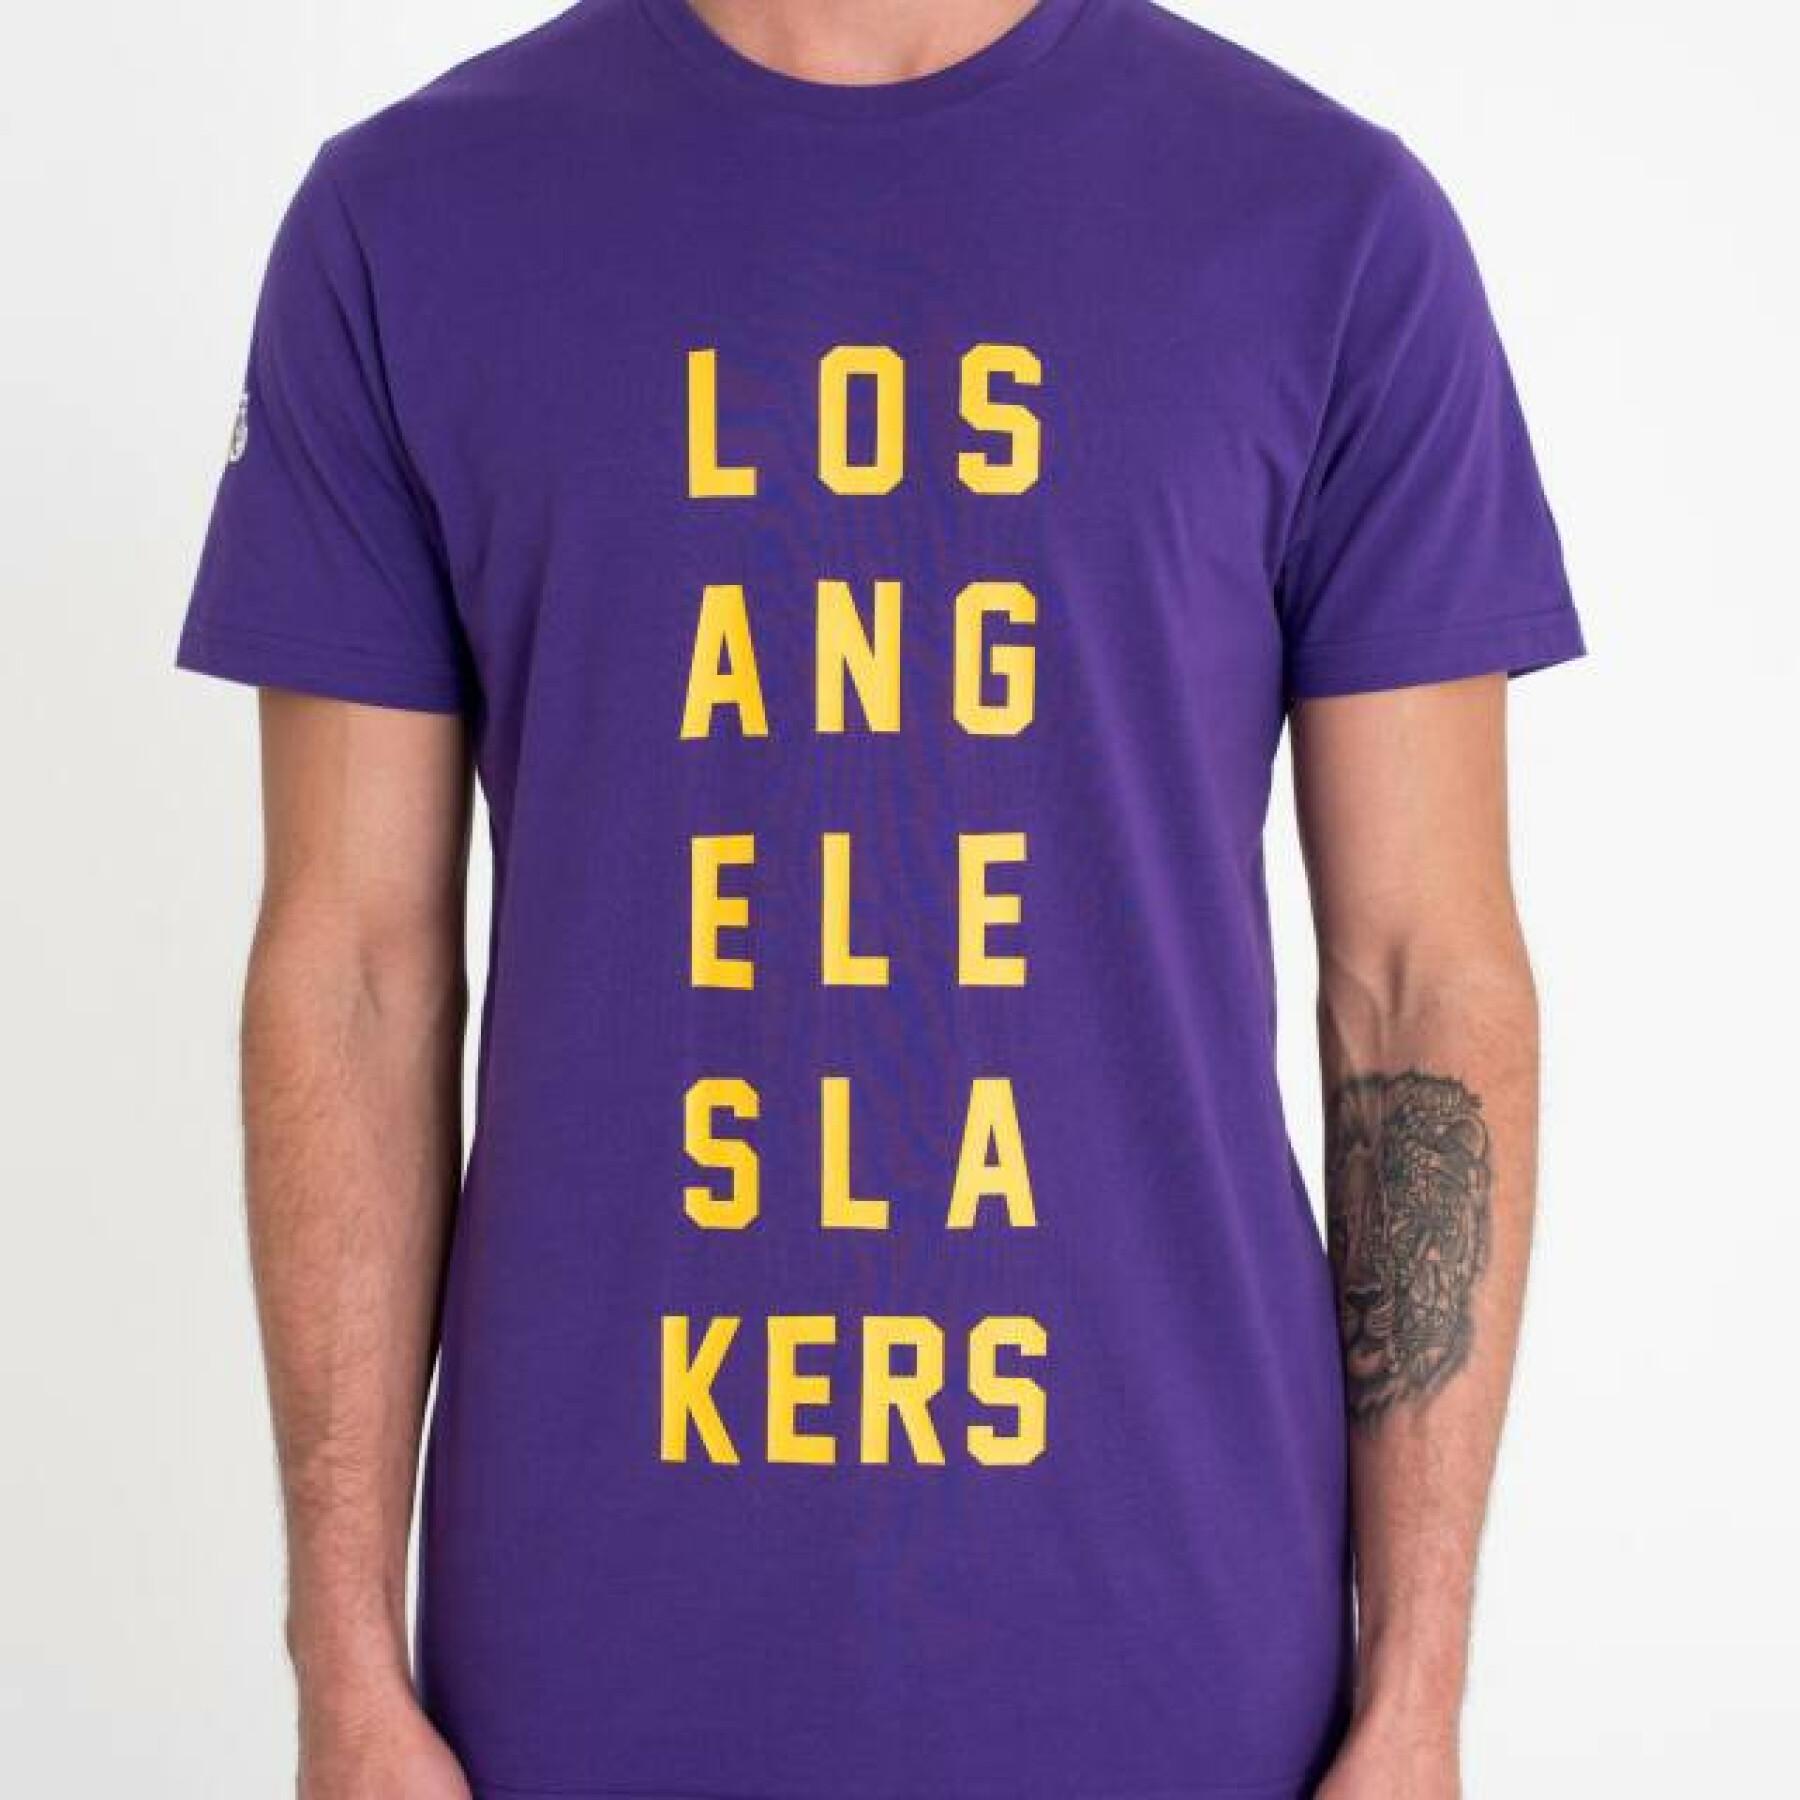  New EraT - s h i r t   Stacked Womark Los Angeles Lakers